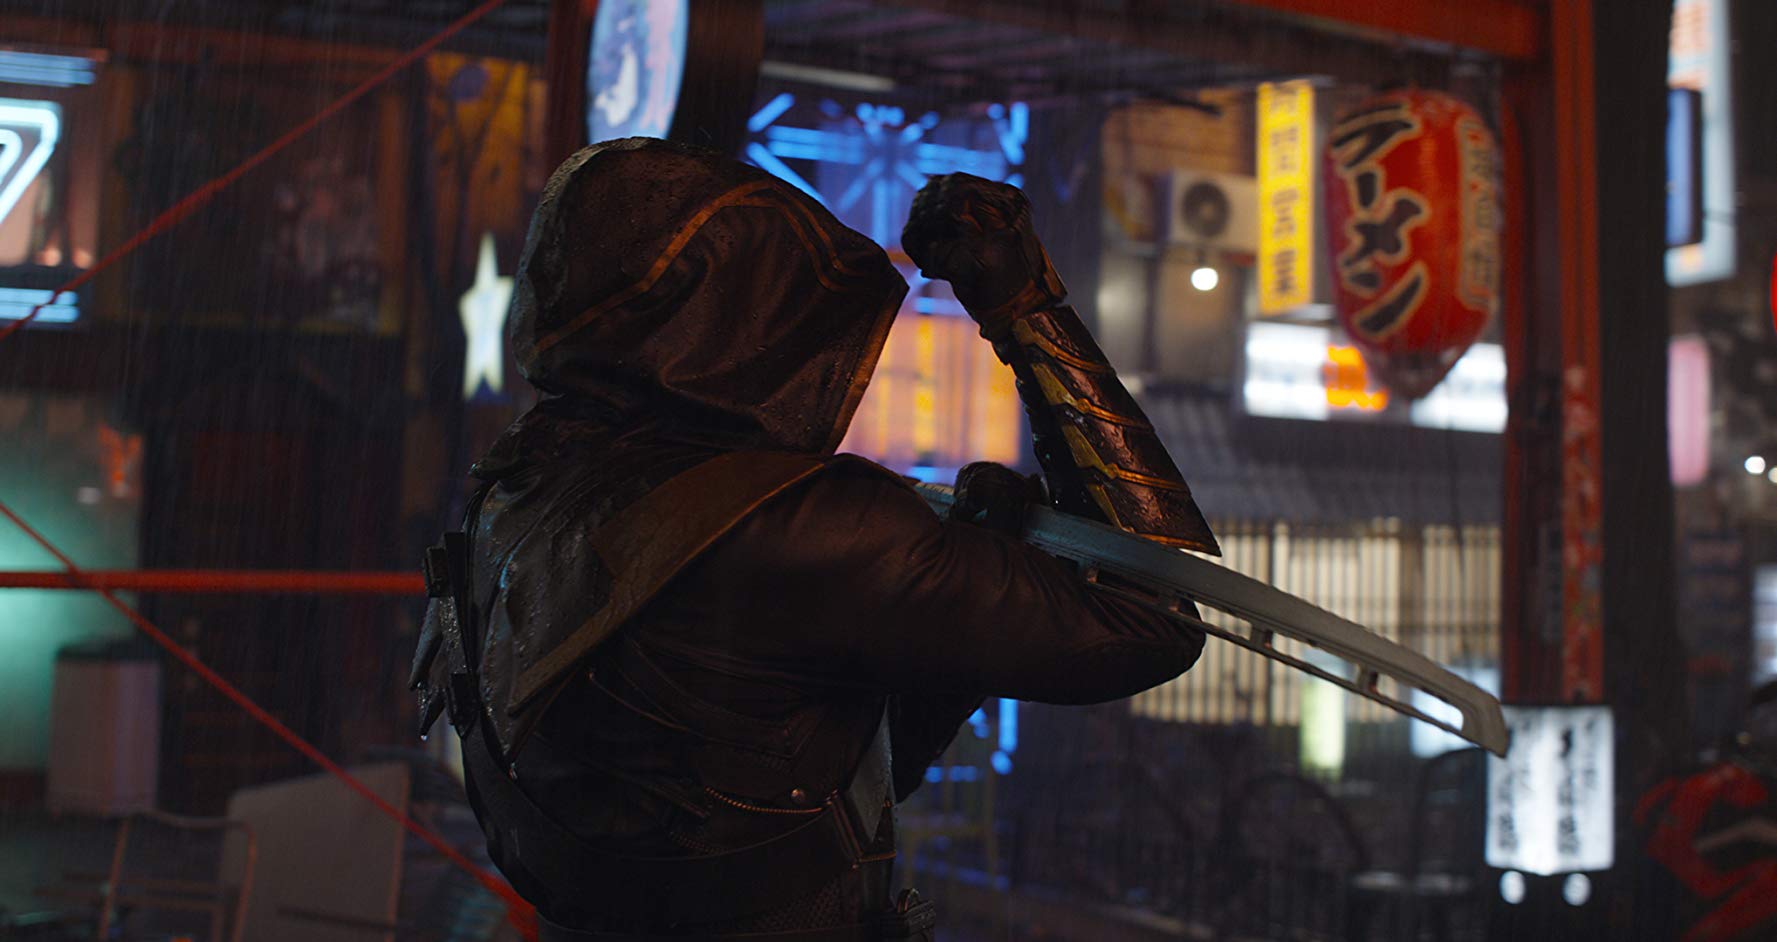 One Of My Favouritee Pics Of Ronin Hawkeye From Avengers Endgame.(1920x1080)